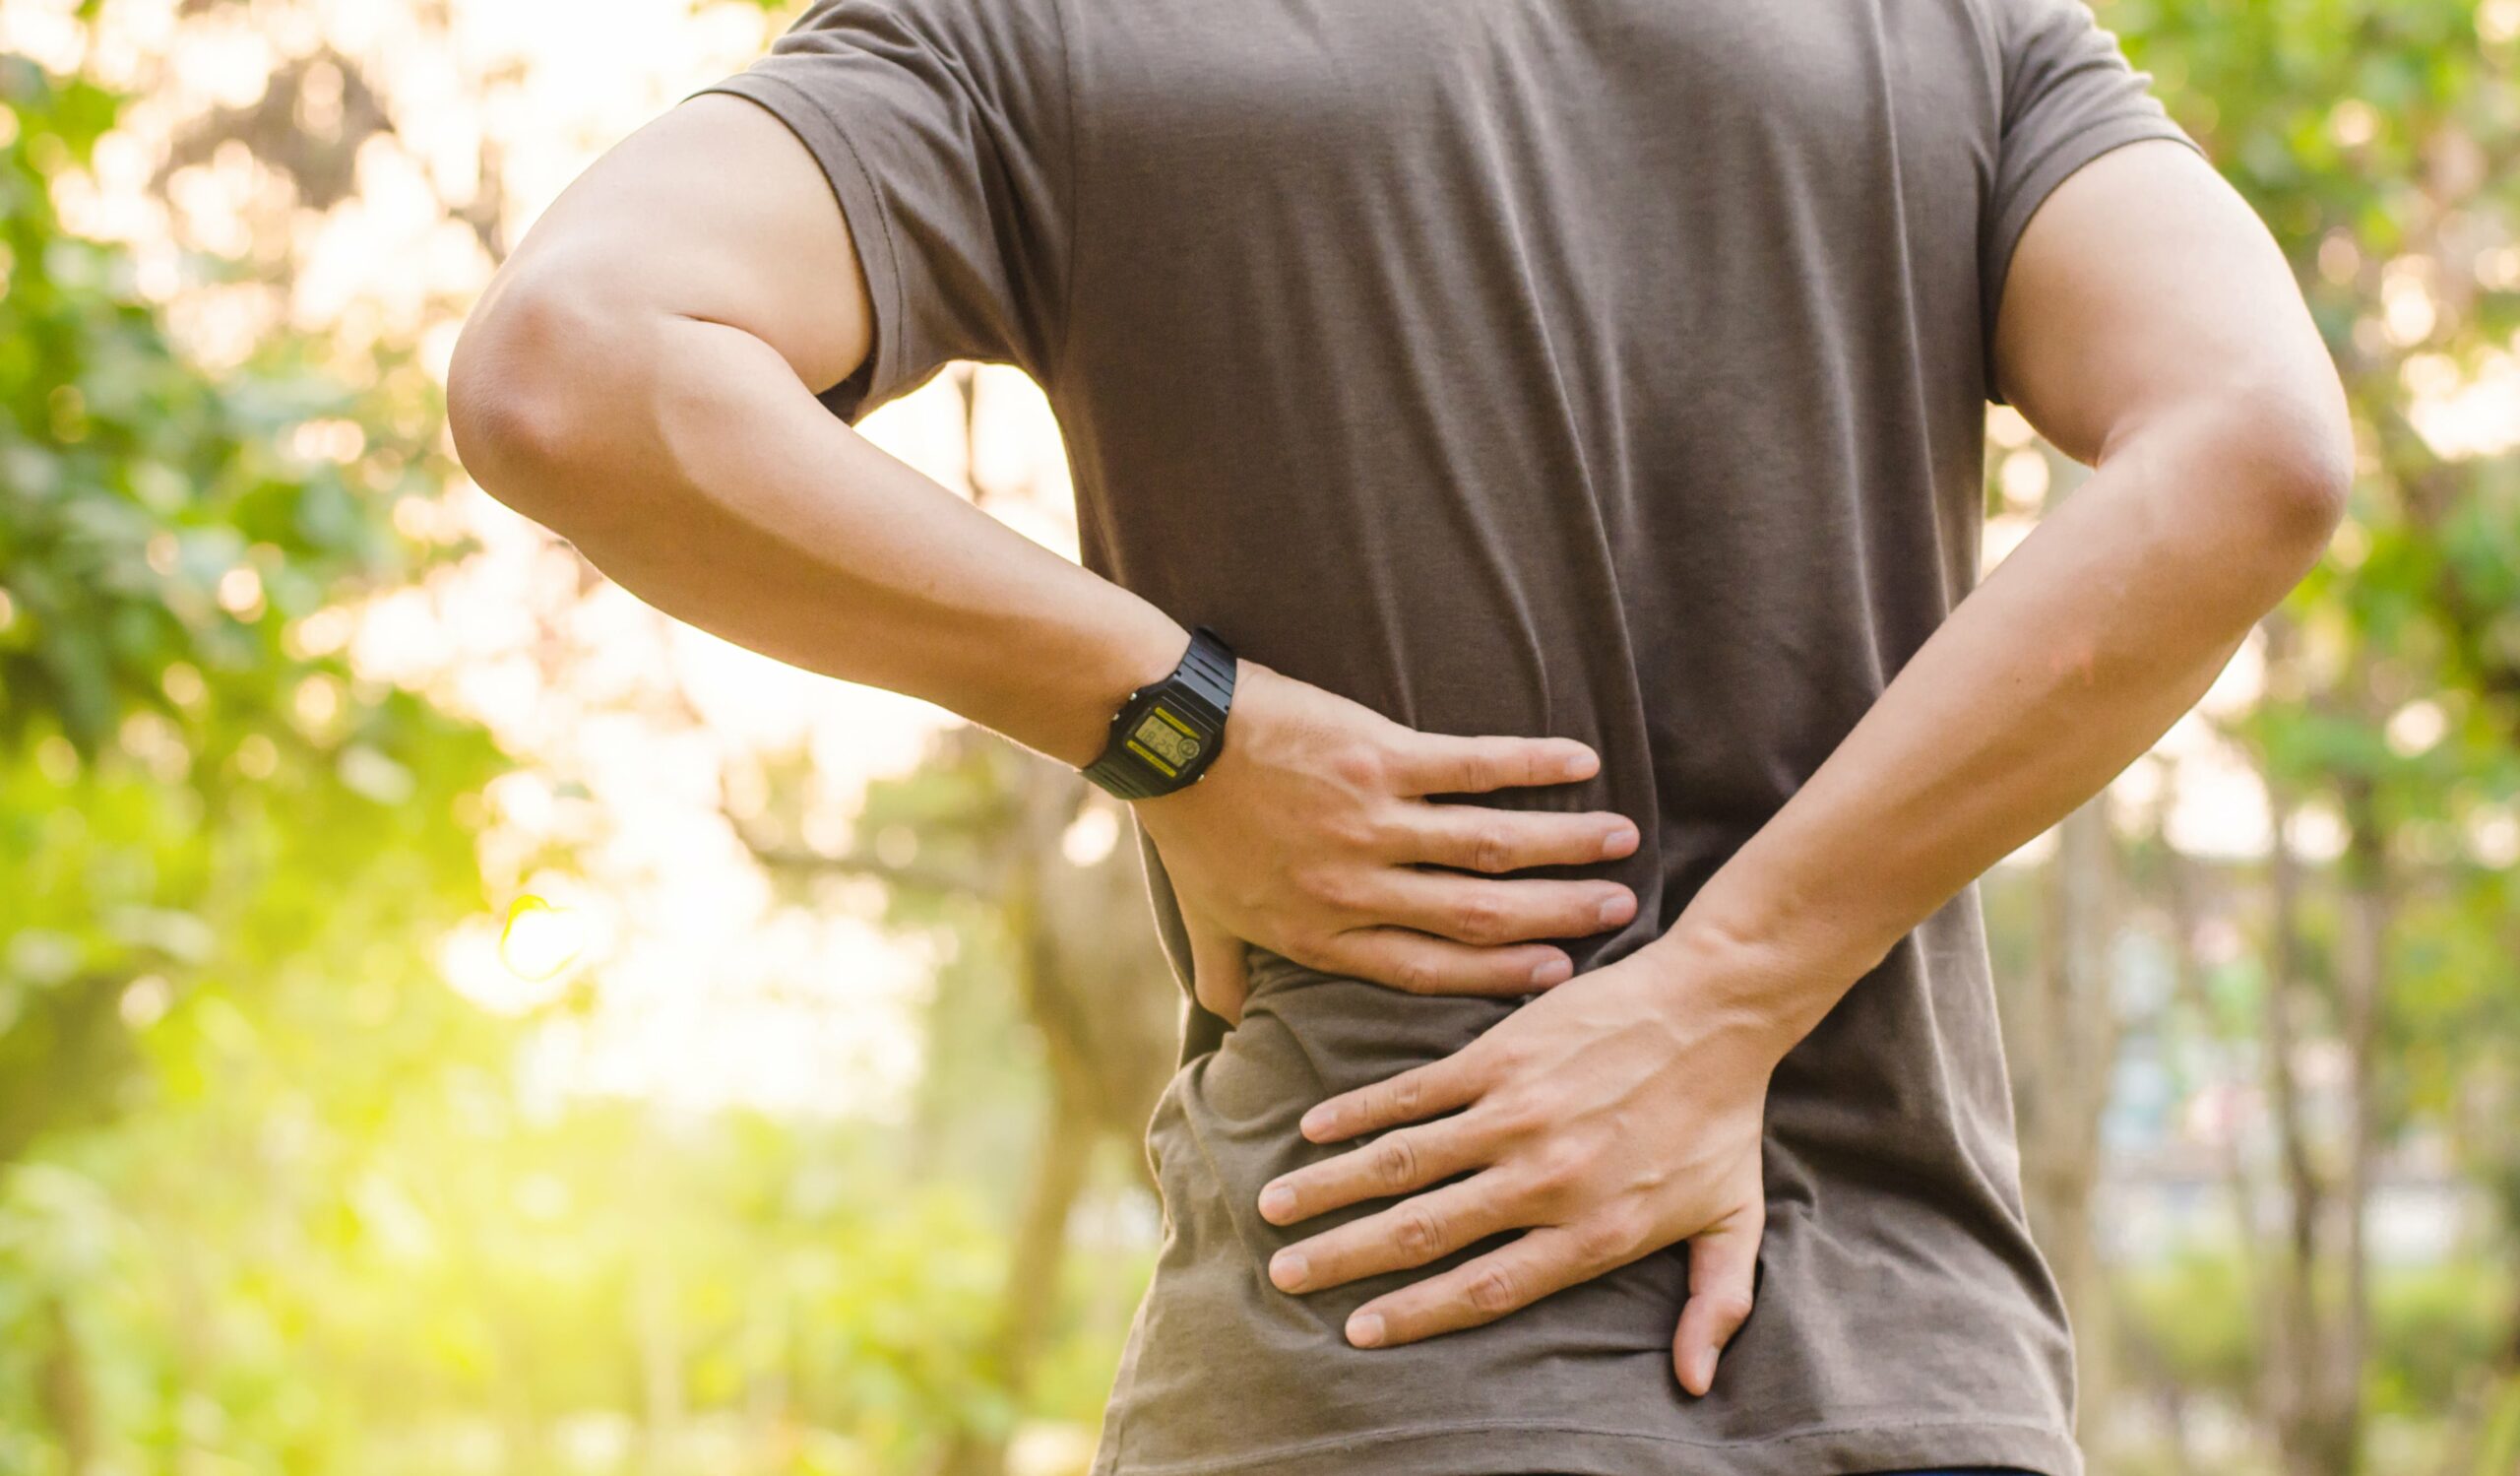 CBD Oil for Back Pain: What the Research and Experts Say